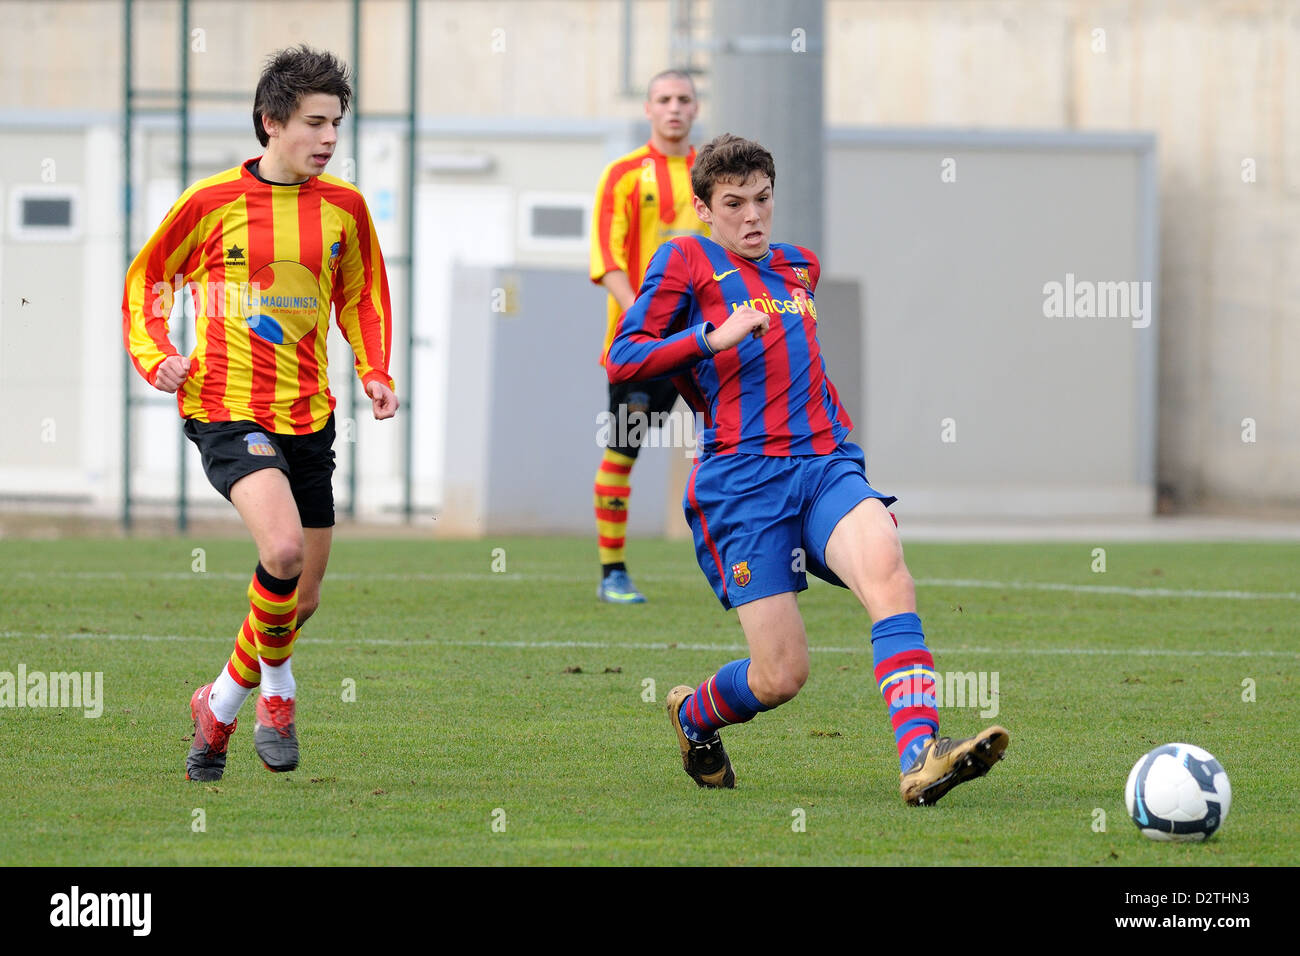 BARCELONA, SPAIN - JAN 24: Sergio Ayala plays with F.C Barcelona youth team against Sant Andreu. 2010. Stock Photo